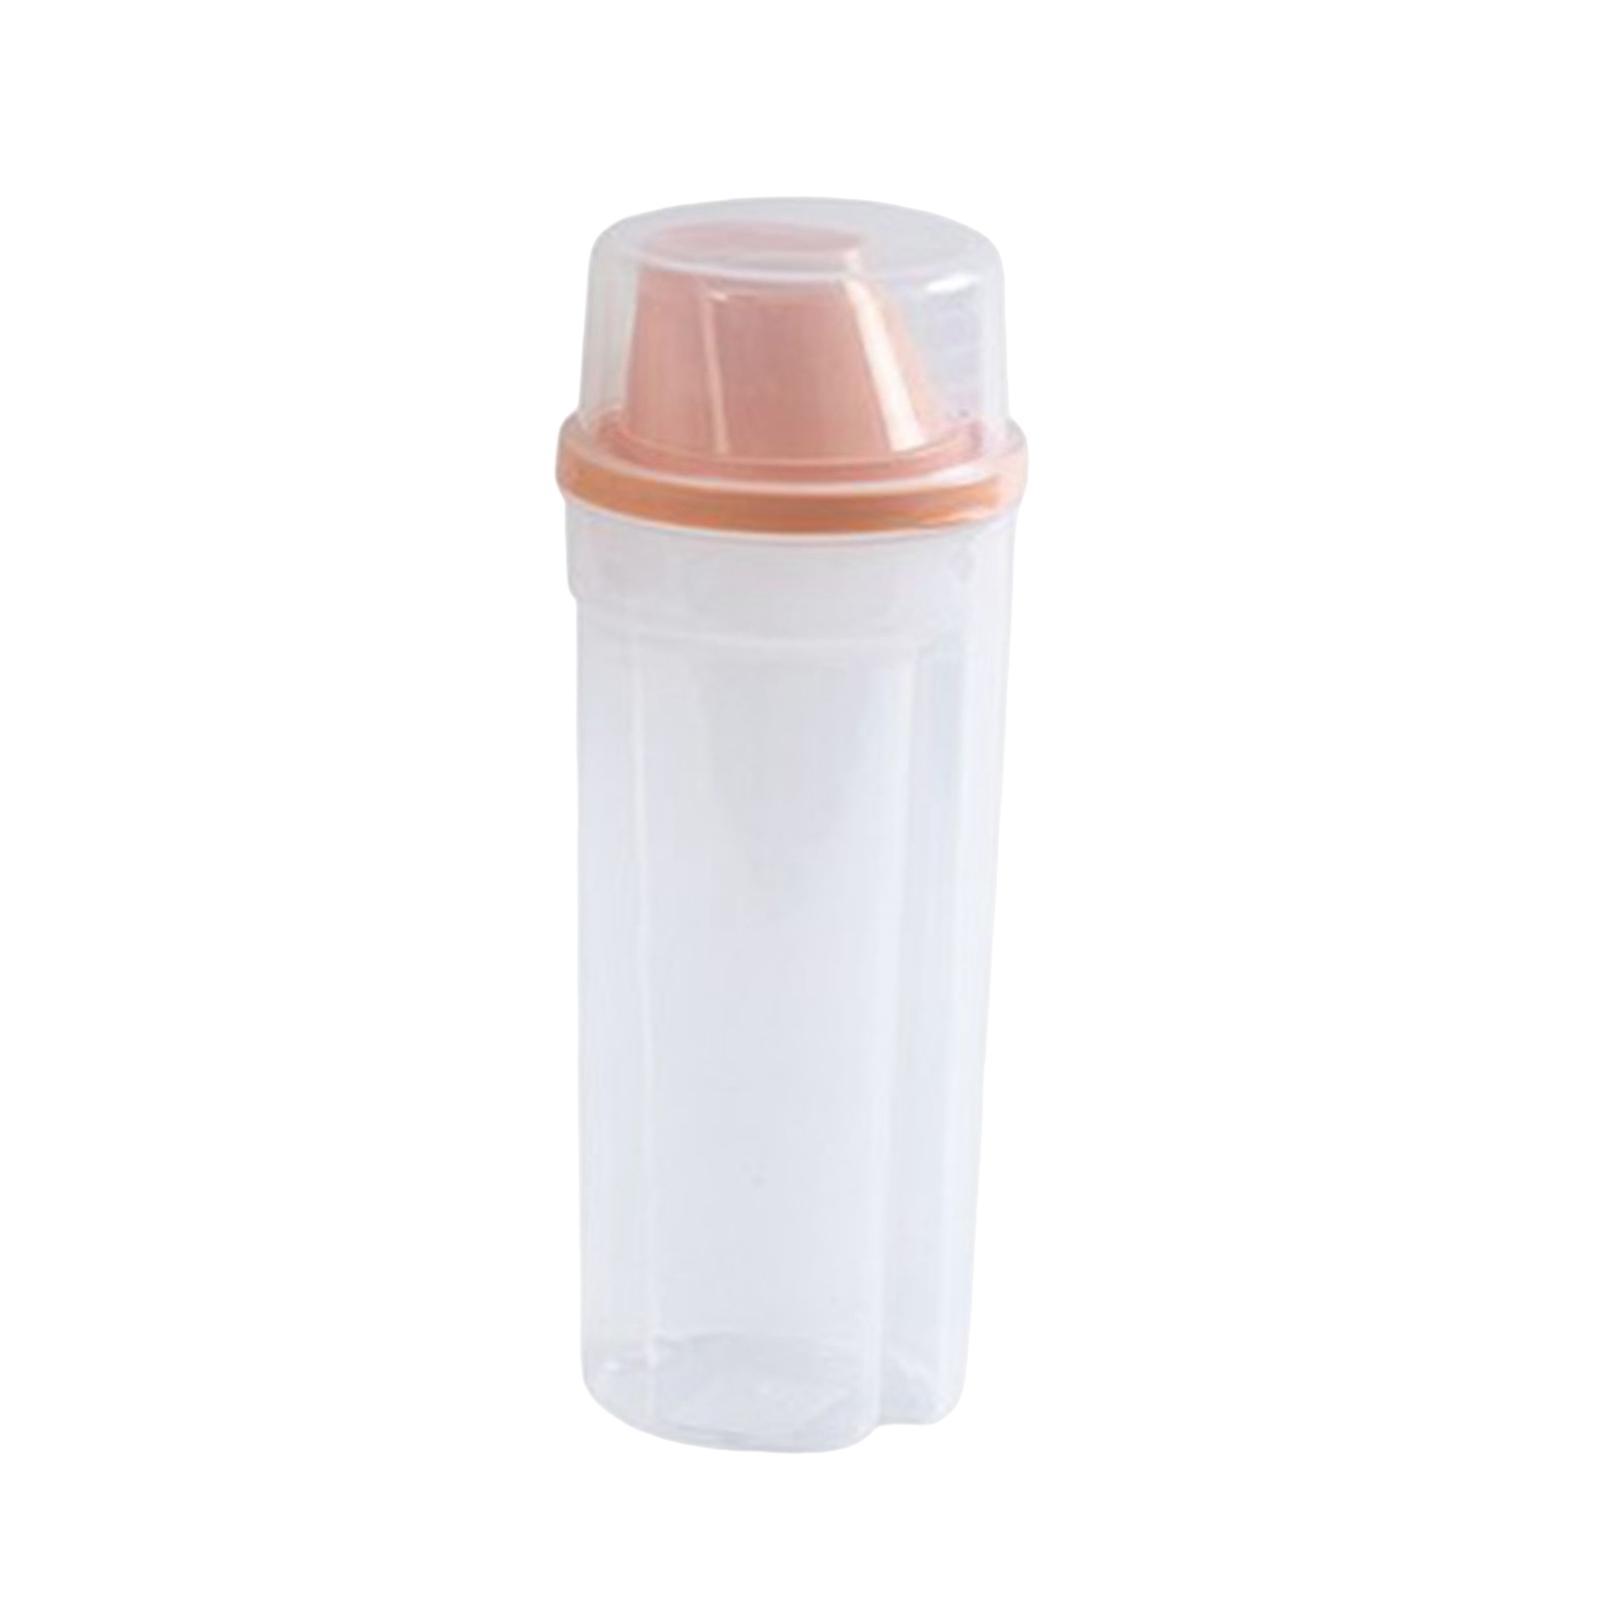 Sealed Cereal Container Food Dispenser Rice Storage Bin for Sugar Cereal